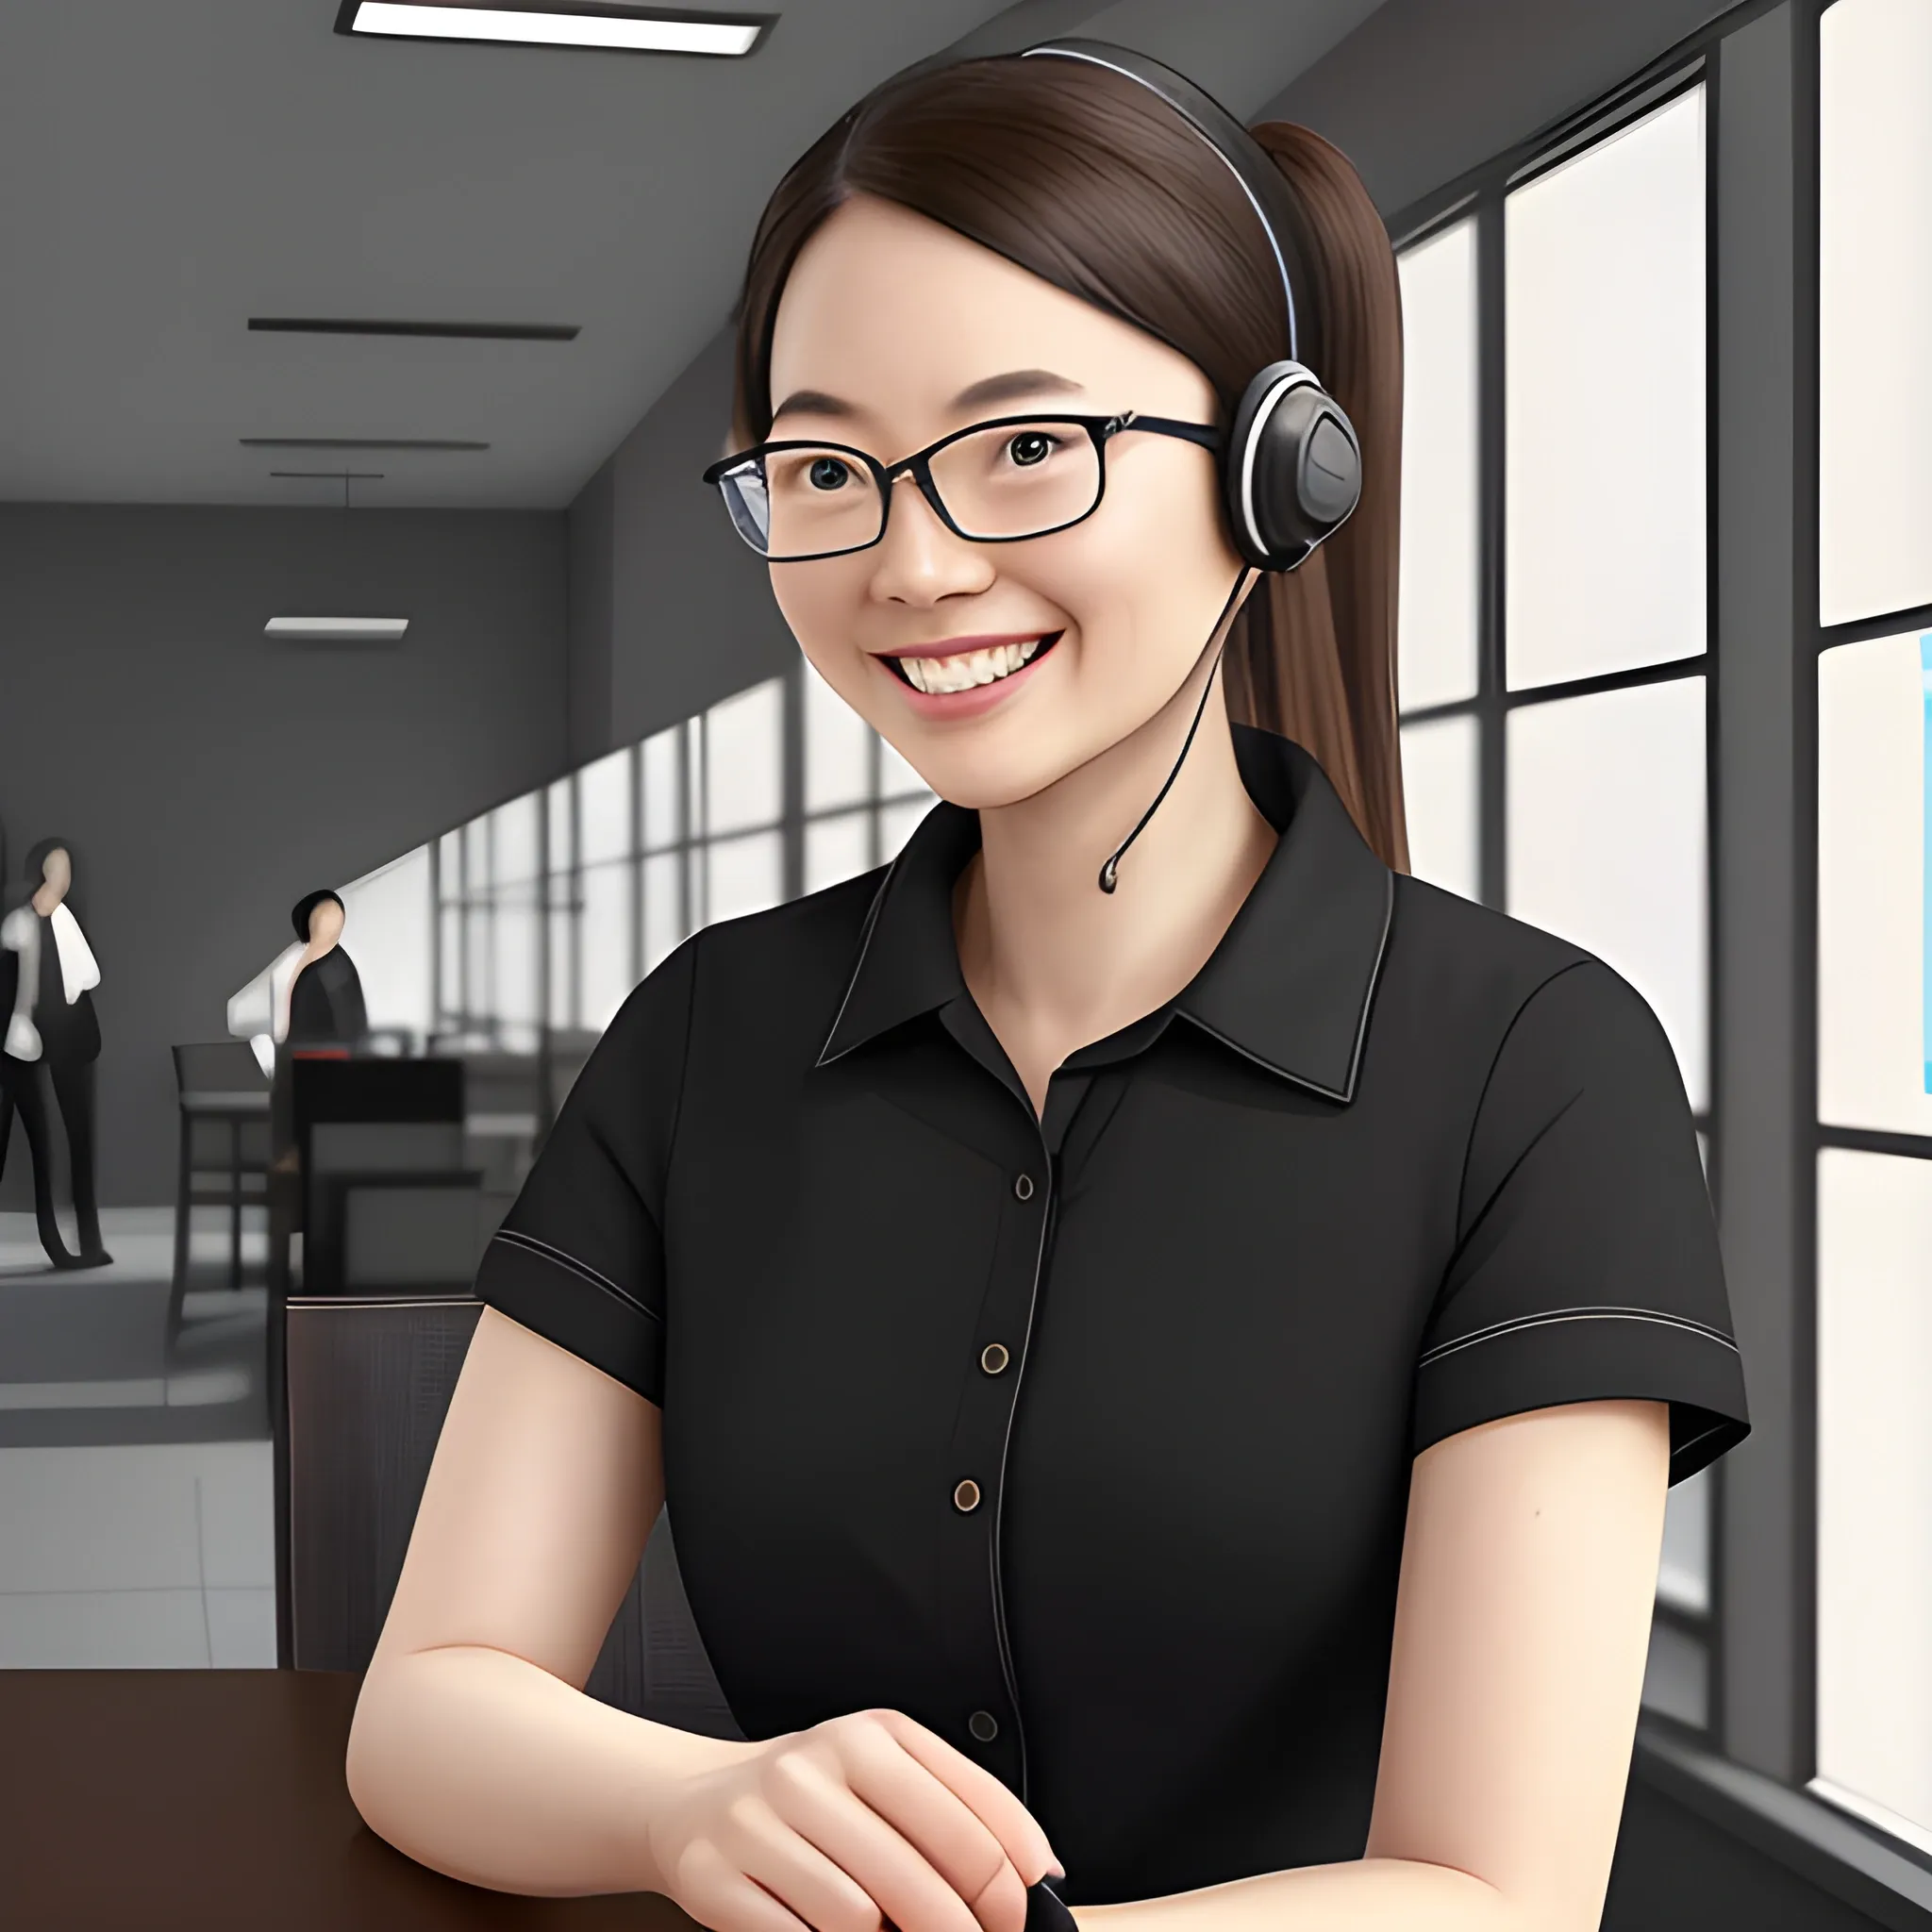 Emily, chinese female, the customer care specialist, has a warm and welcoming appearance that puts customers at ease. She wears sleek, black-framed glasses that accentuate her attentive and intelligent gaze. Her shoulder-length brown hair is neatly pulled back in a professional ponytail, revealing a stylish headset with a noise-canceling microphone that ensures clear customer communication. Emily's friendly smile is a constant reminder of her empathetic nature, making her the ideal representative for any customer service interaction, hyper-realistic photography, 8k, indirect lighting --s 750, Pencil Sketch